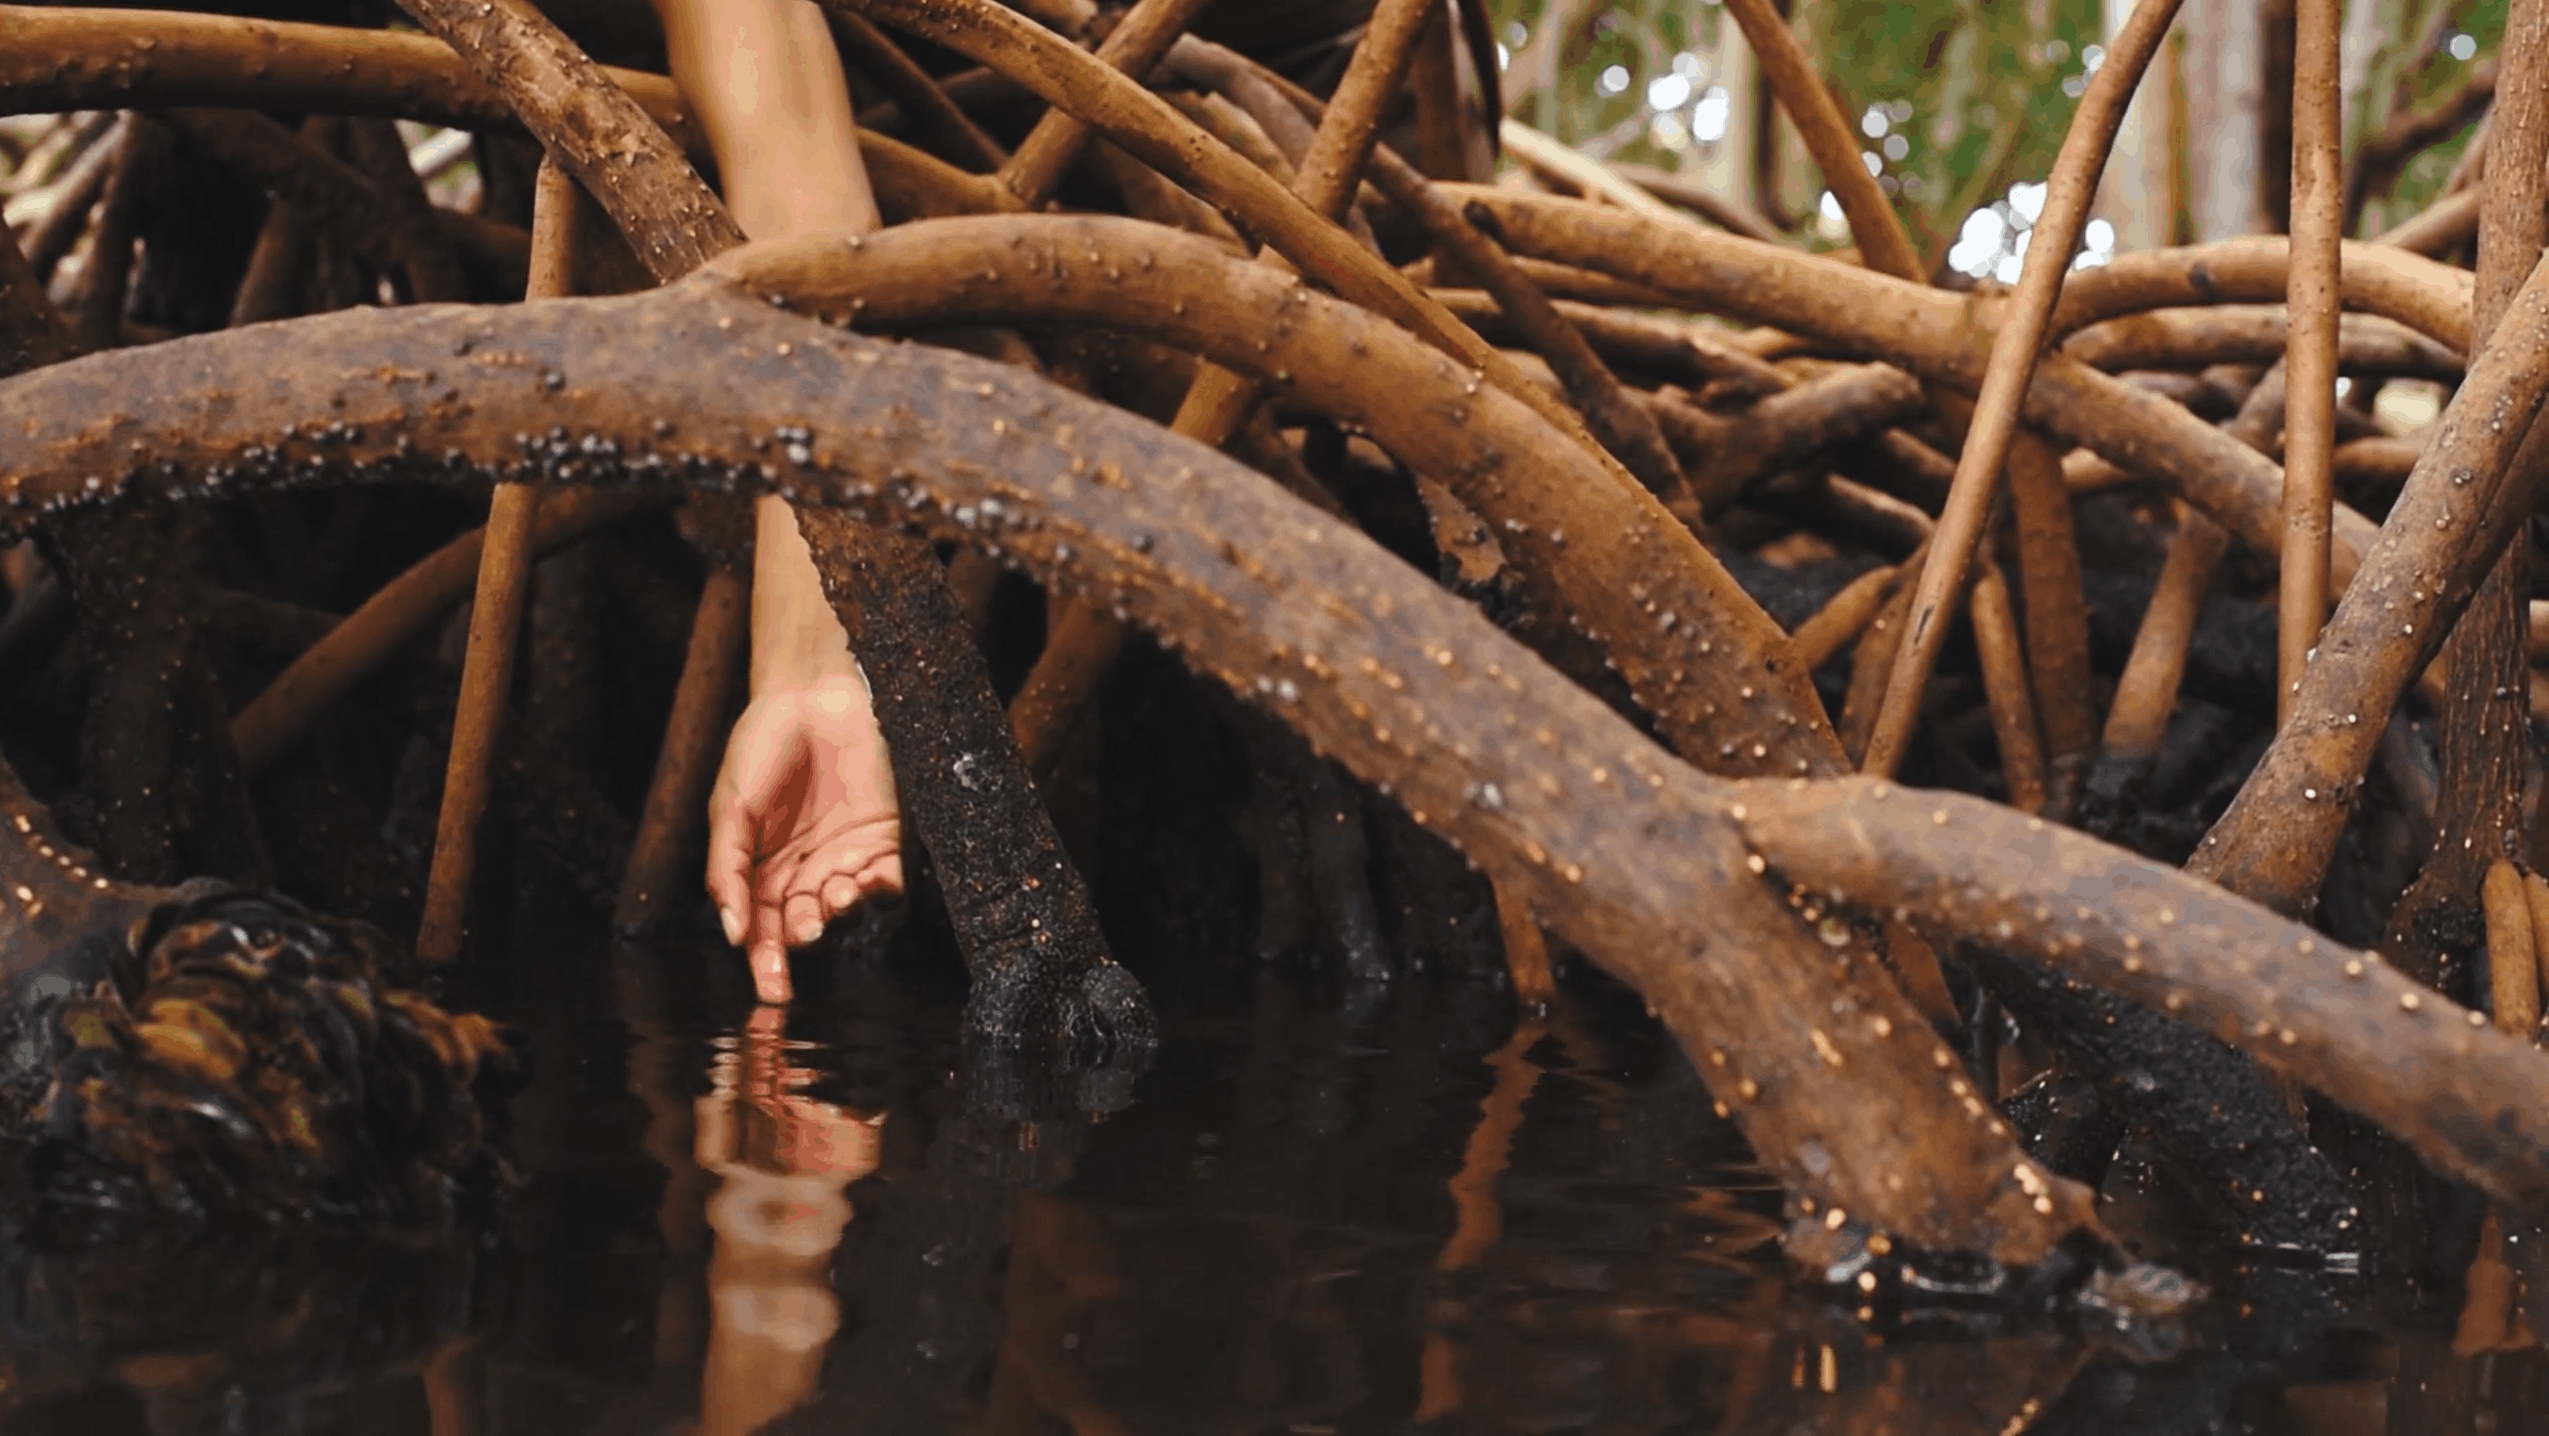 Image of hand dipping into the water in the mangroves.